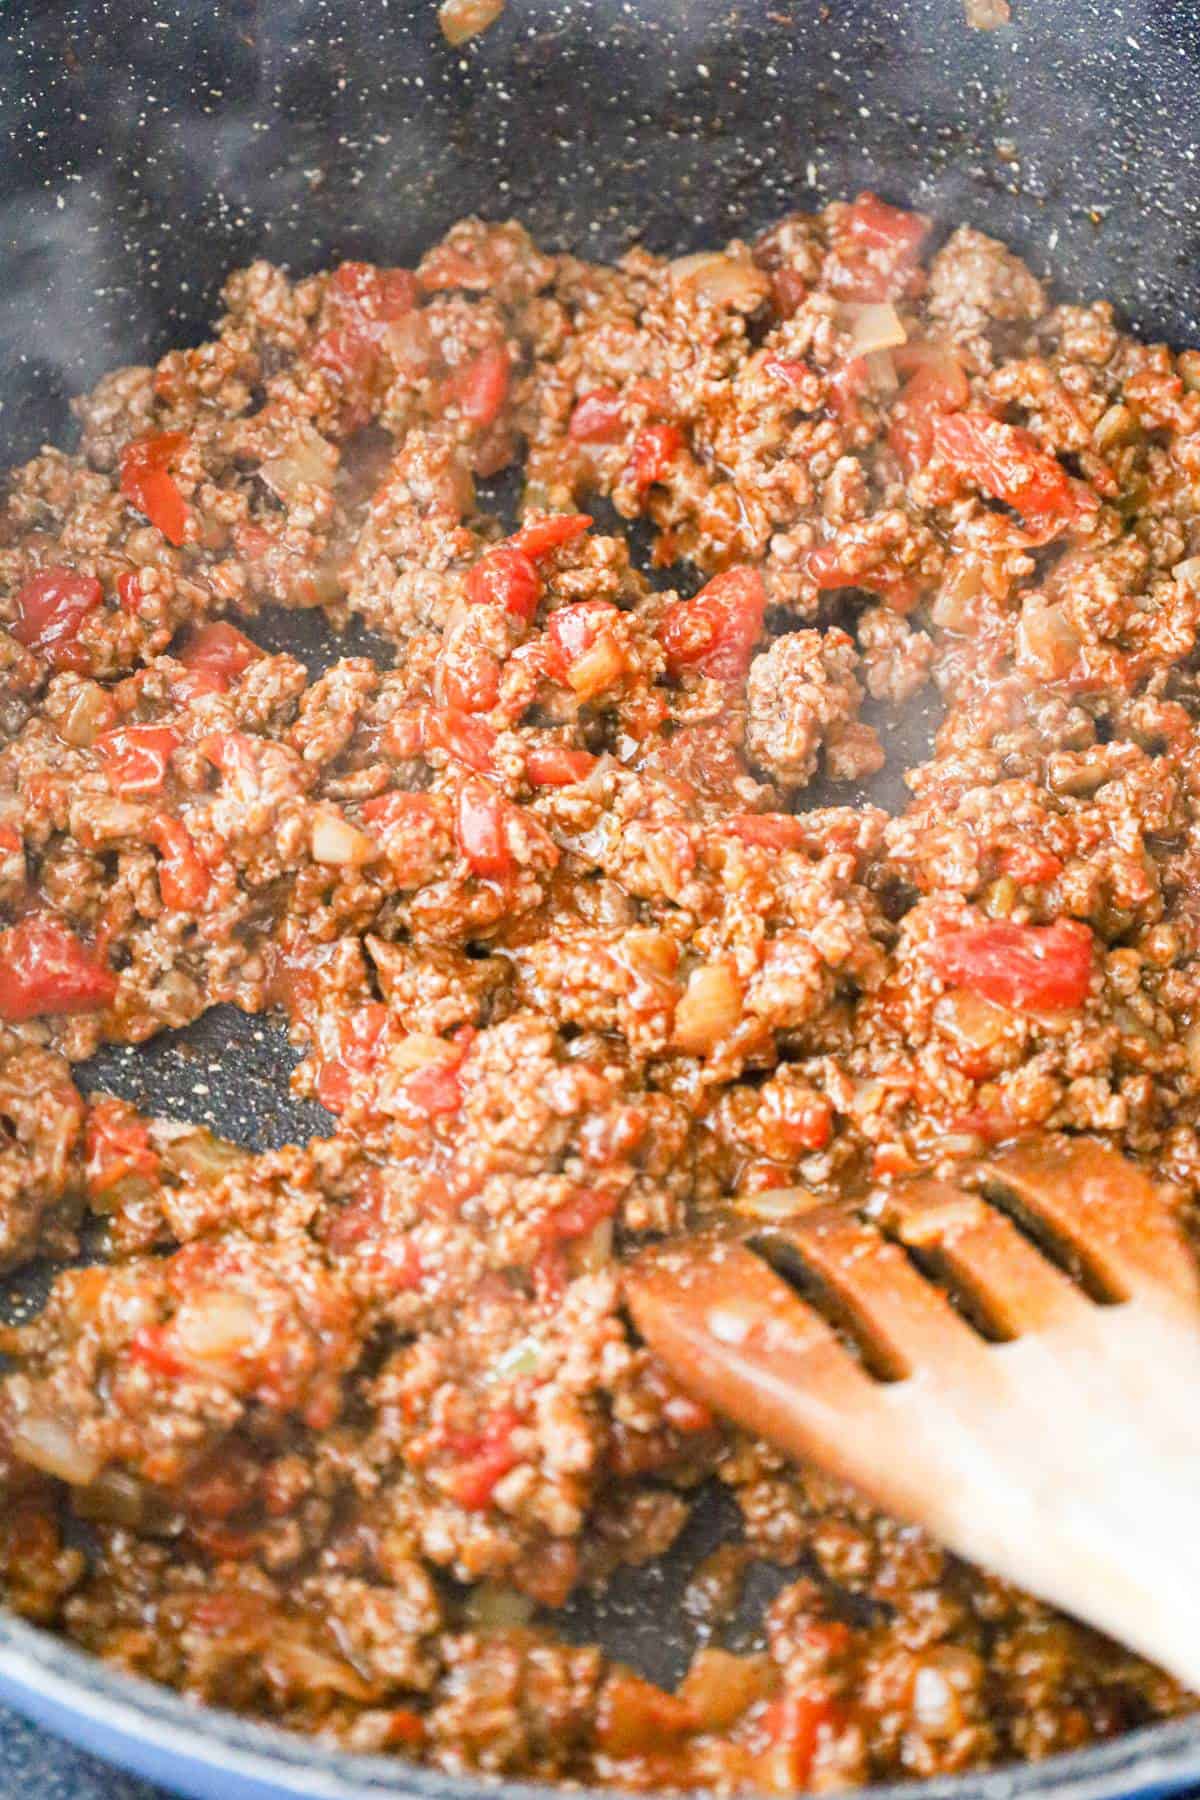 Rotel and ground beef mixture in a saute pan